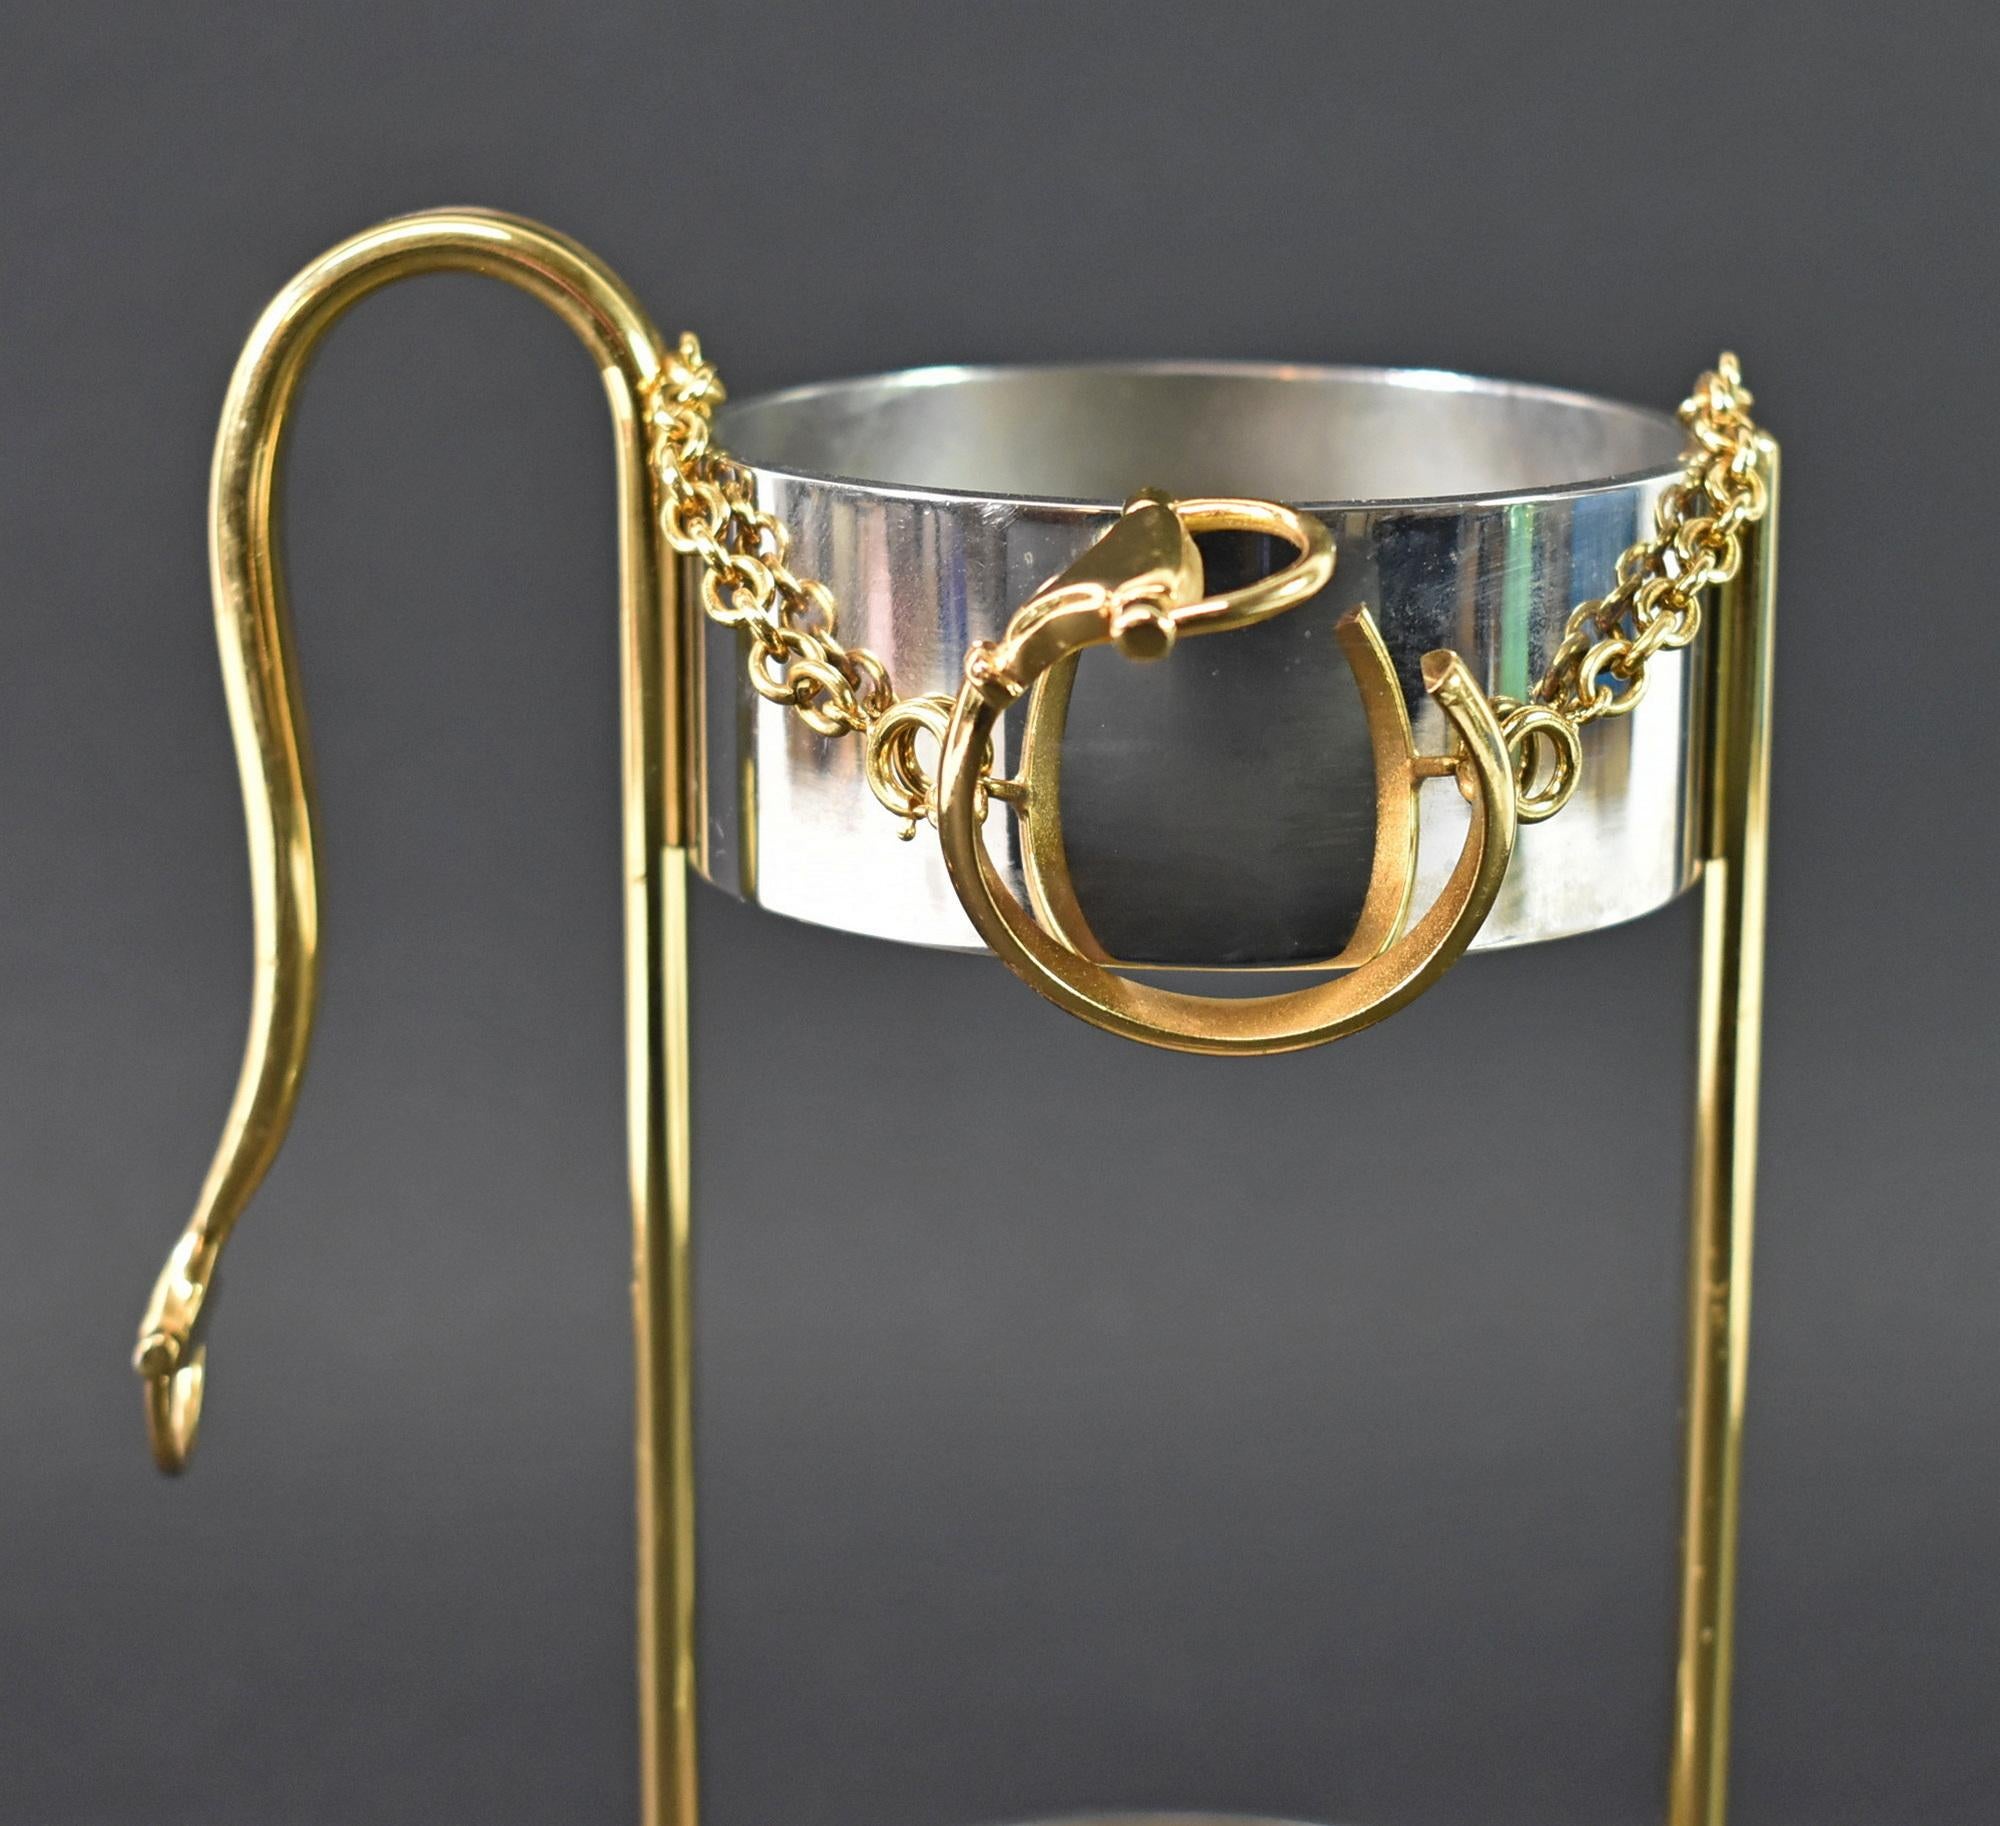 Vintage Gucci Chrome and Brass Wine Bottle Holder. circa 1970s. Stirrup on handle and neck holder. Mark Gucci, Made in Italy on bottom. Holds a standard bottle of wine. Good condition, wear consistent with usage and age, some fingerprints are shown